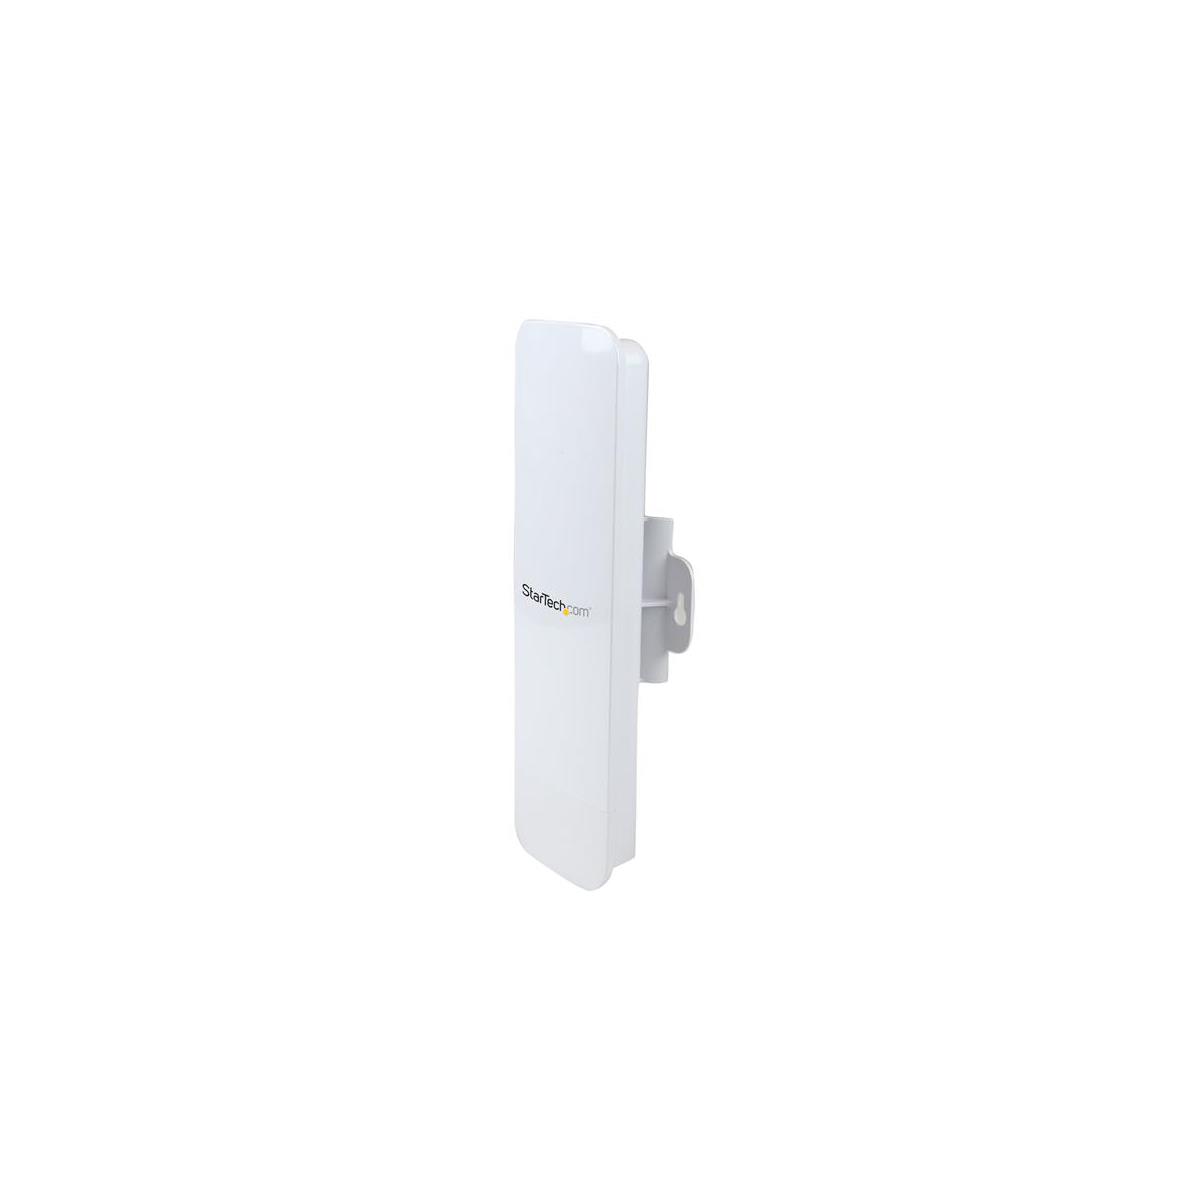 Image of StarTech Outdoor 300 Mbps 2T2R 5GHz Wireless-N Access Point